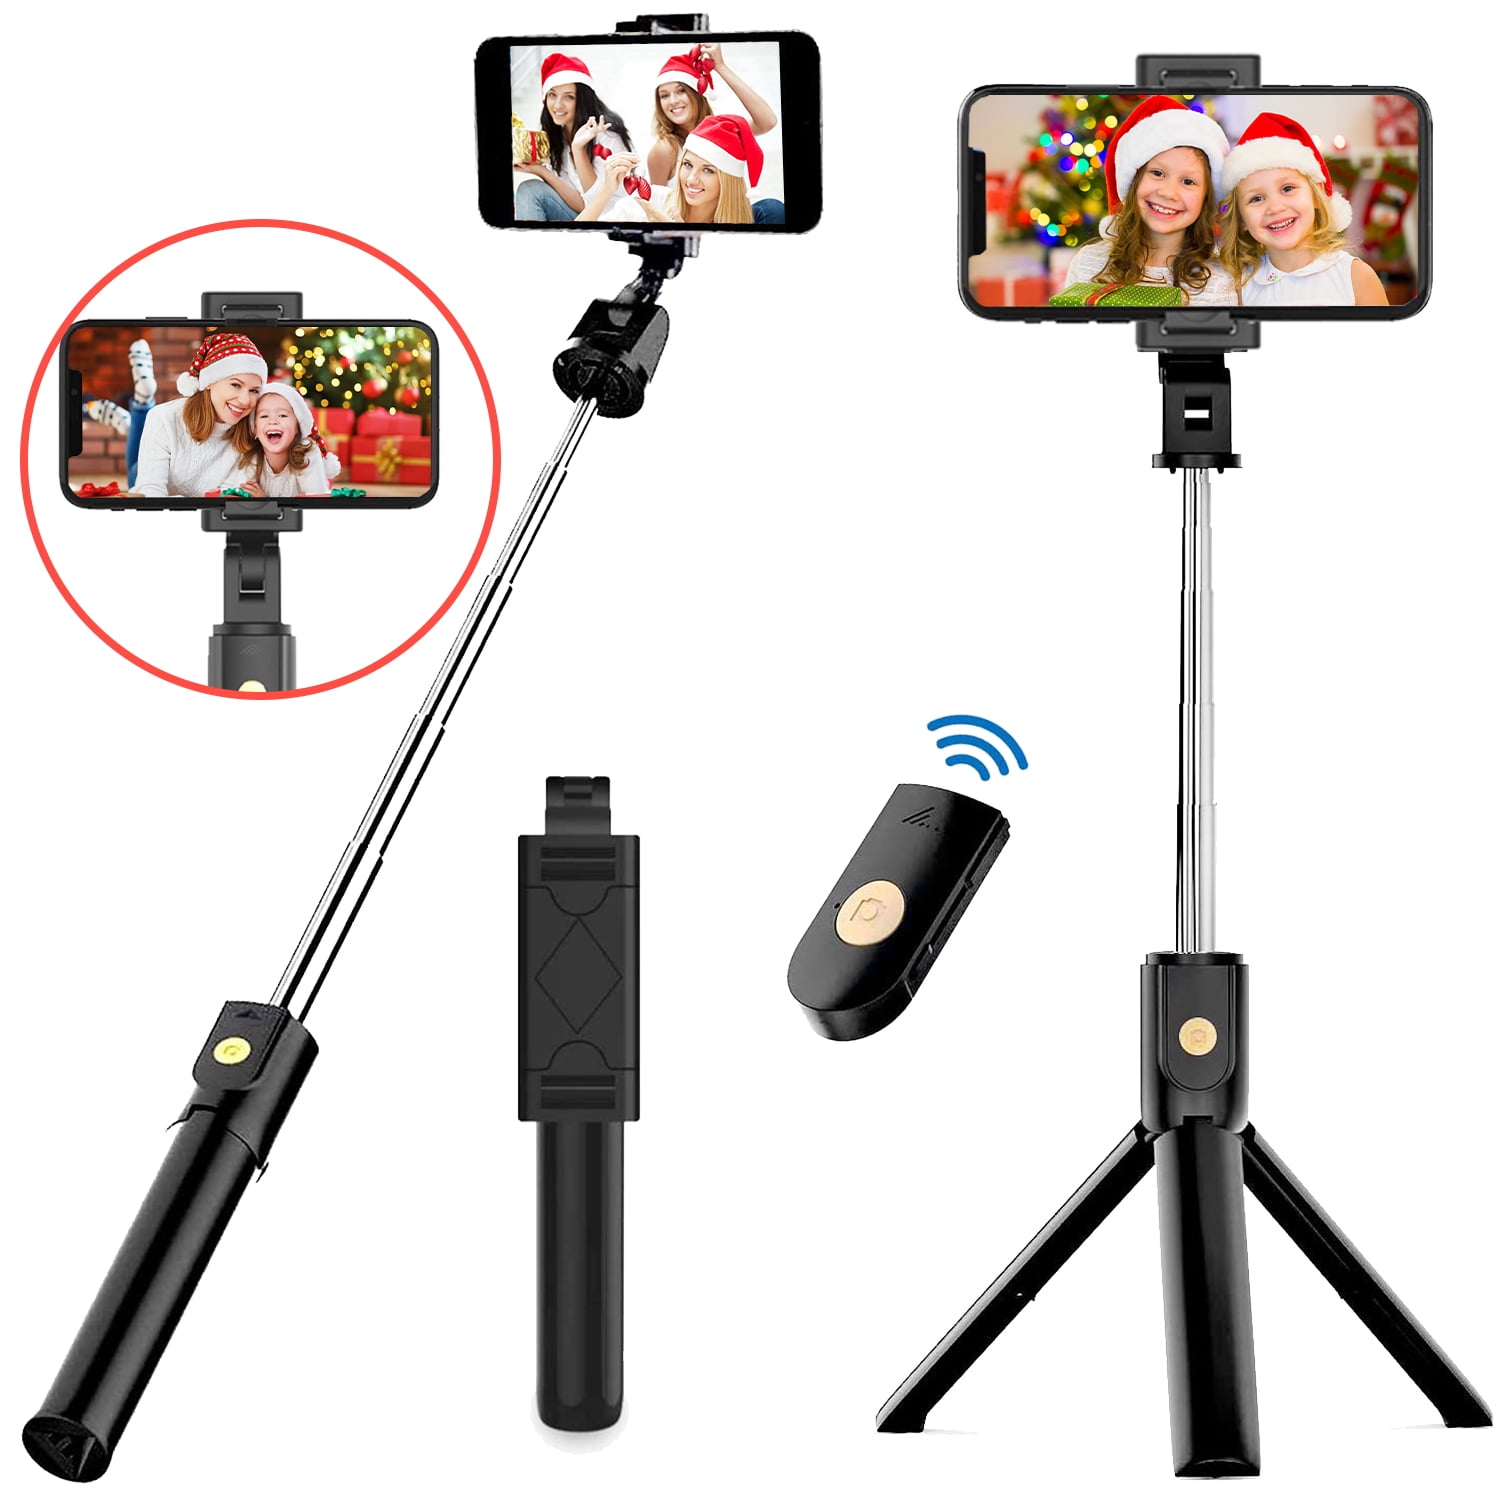 Stainless Steel 4 in 1 Wireless Remote Shutter+Handheld Cellphone Selfie Stick Monopod+Tripod+Holder for IOS Android SmartPhone black Jasnyfall